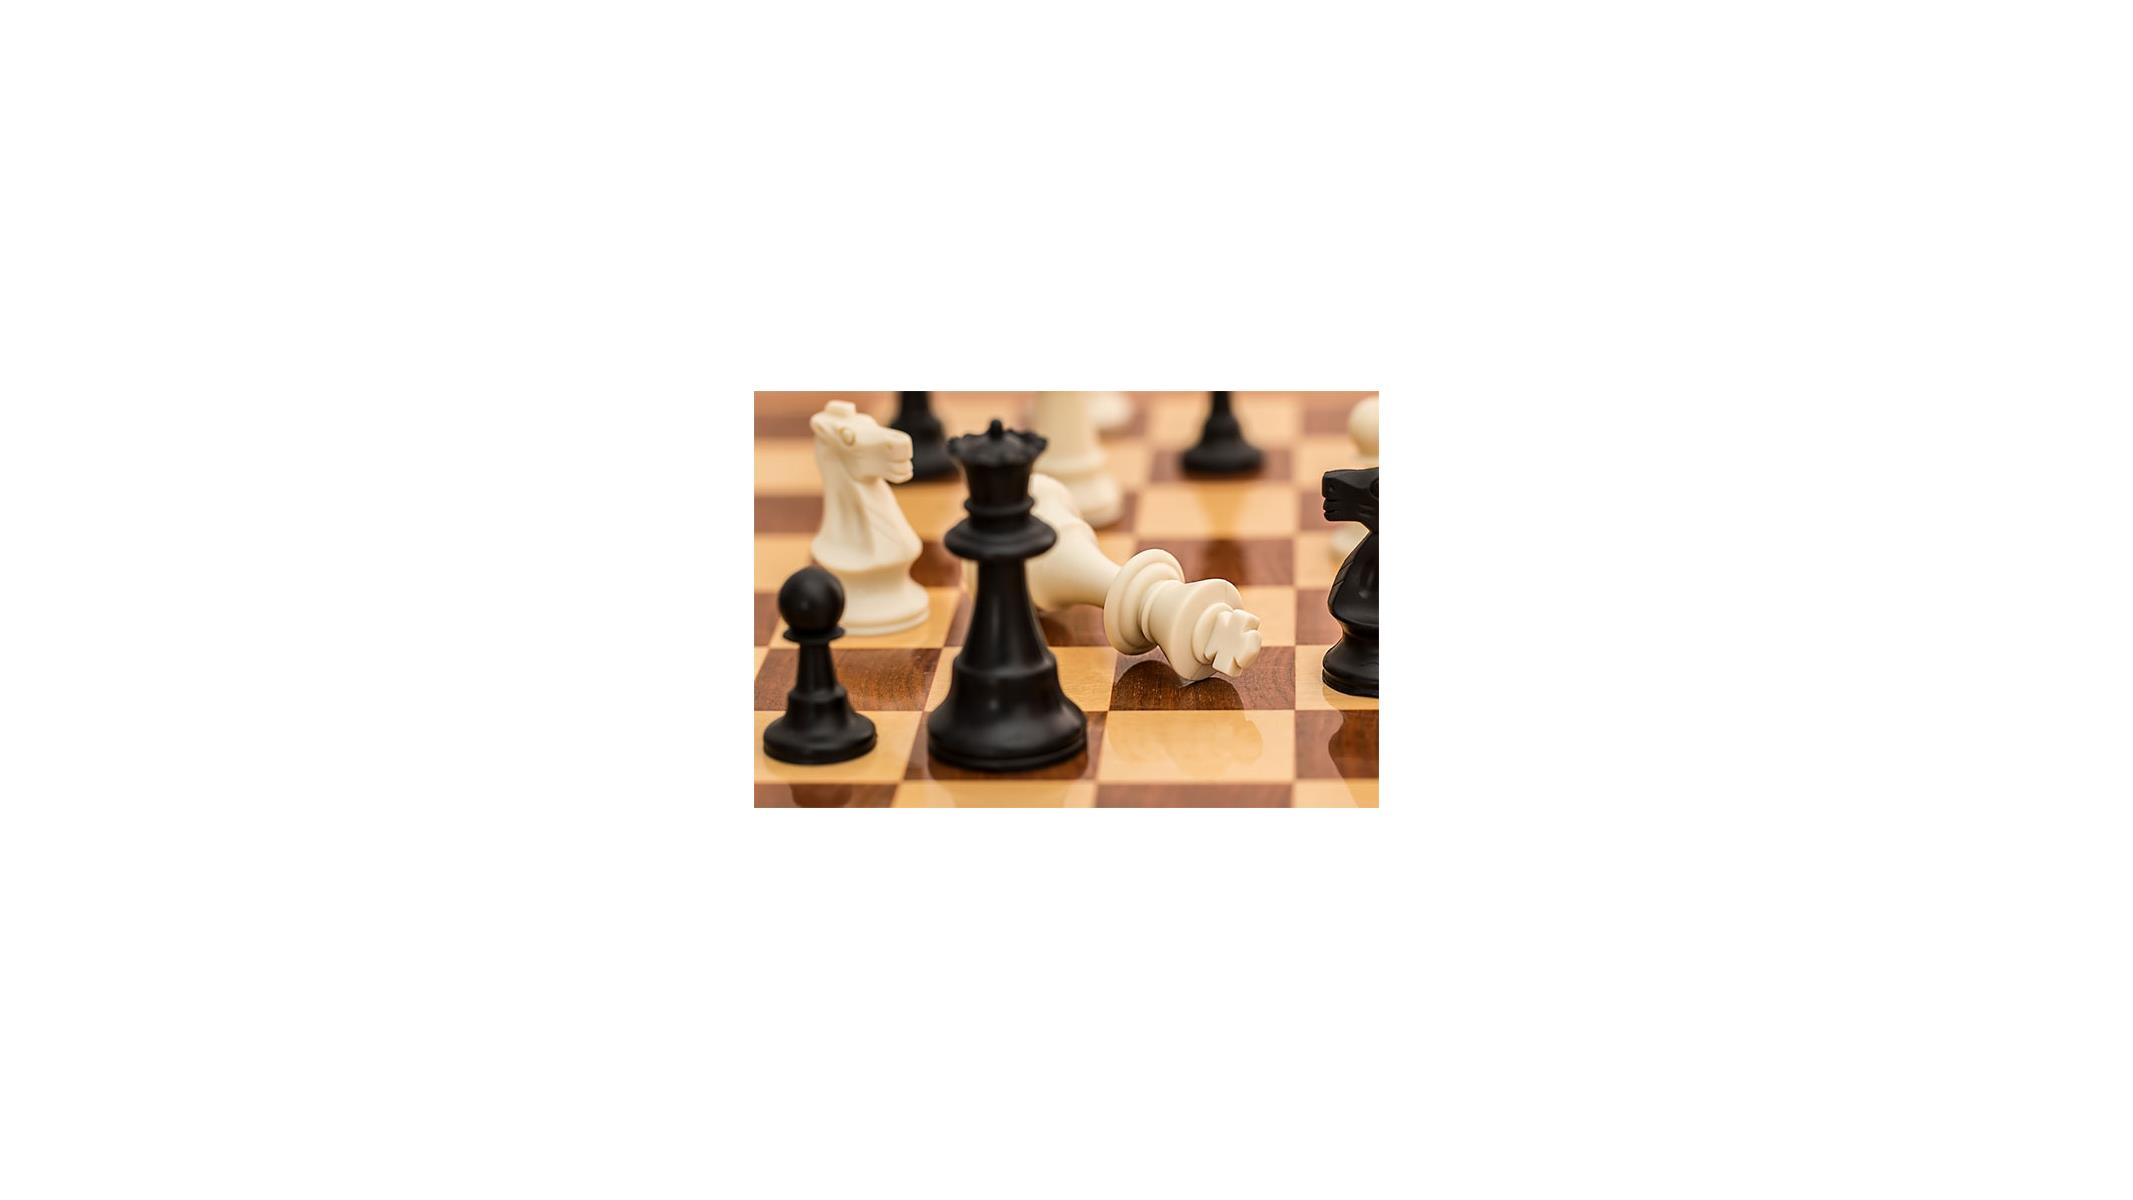 Google's AI teaches itself chess in 4 hours, then convincingly defeats  Stockfish